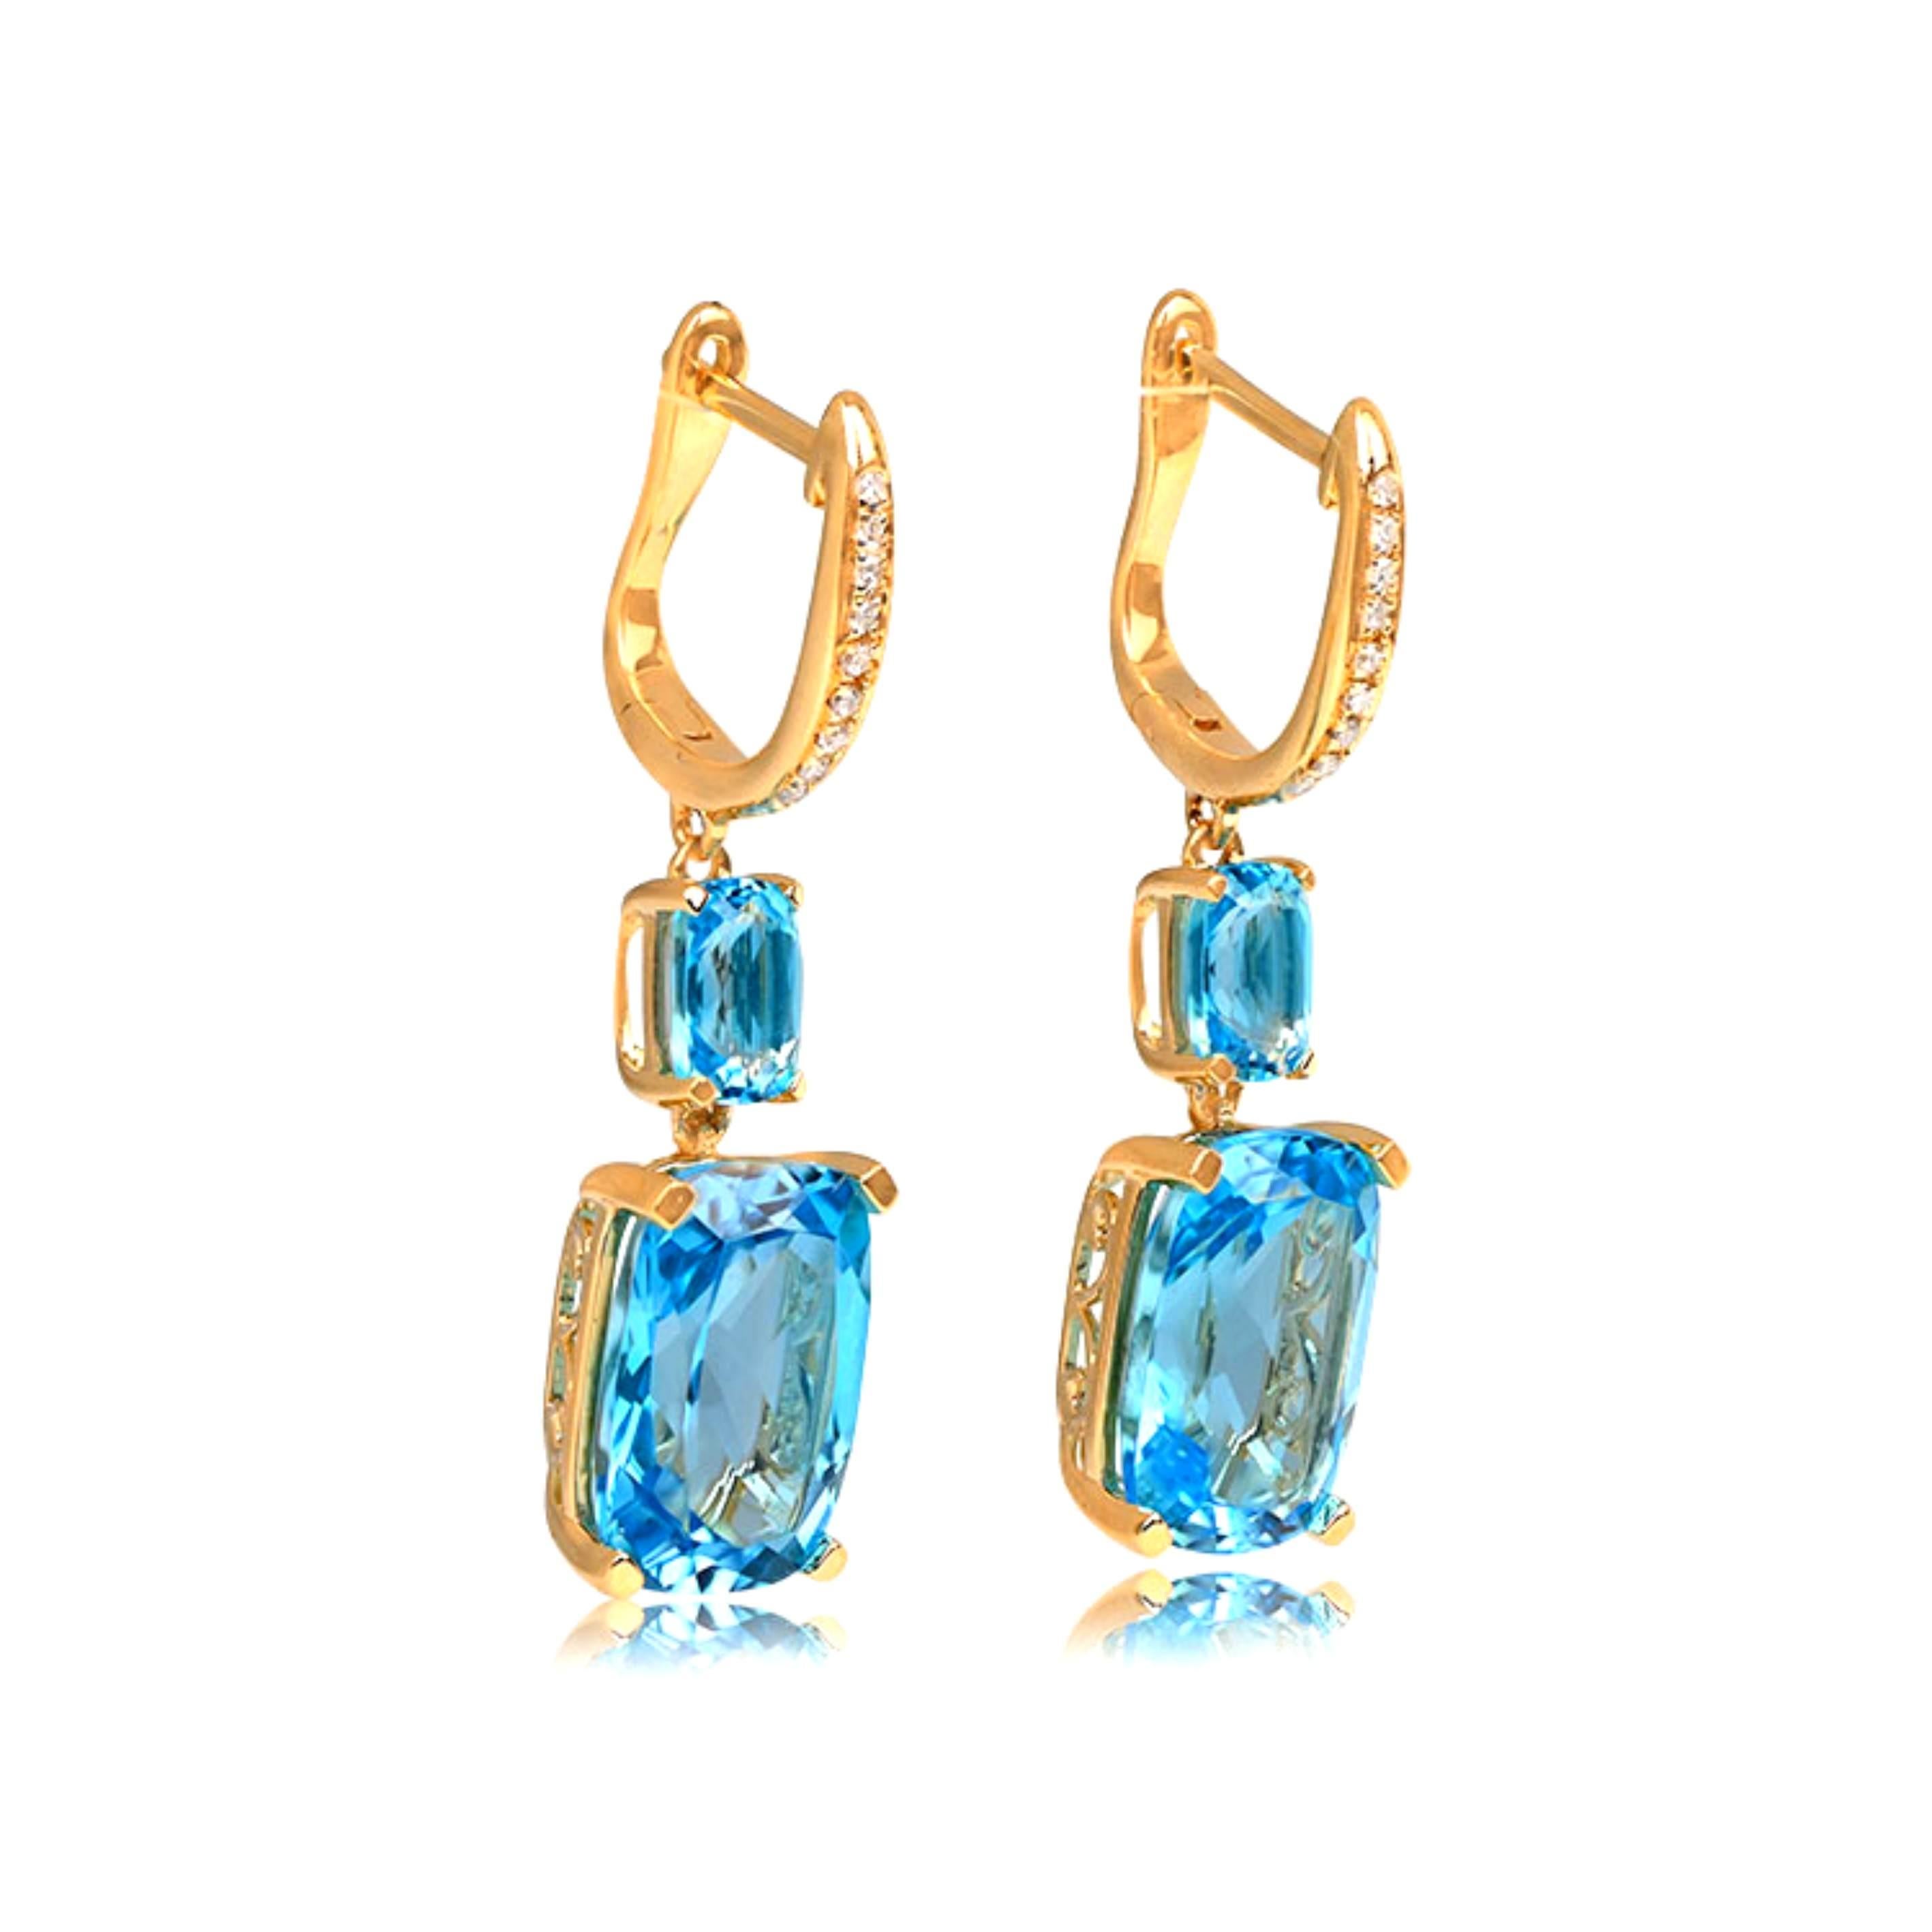 Elevate your style with the enchanting beauty of these 14k yellow gold drop earrings. Designed to captivate, they showcase cushion-cut natural blue topaz gemstones securely set in prongs. The total weight of the topaz is an impressive 10.51 carats,